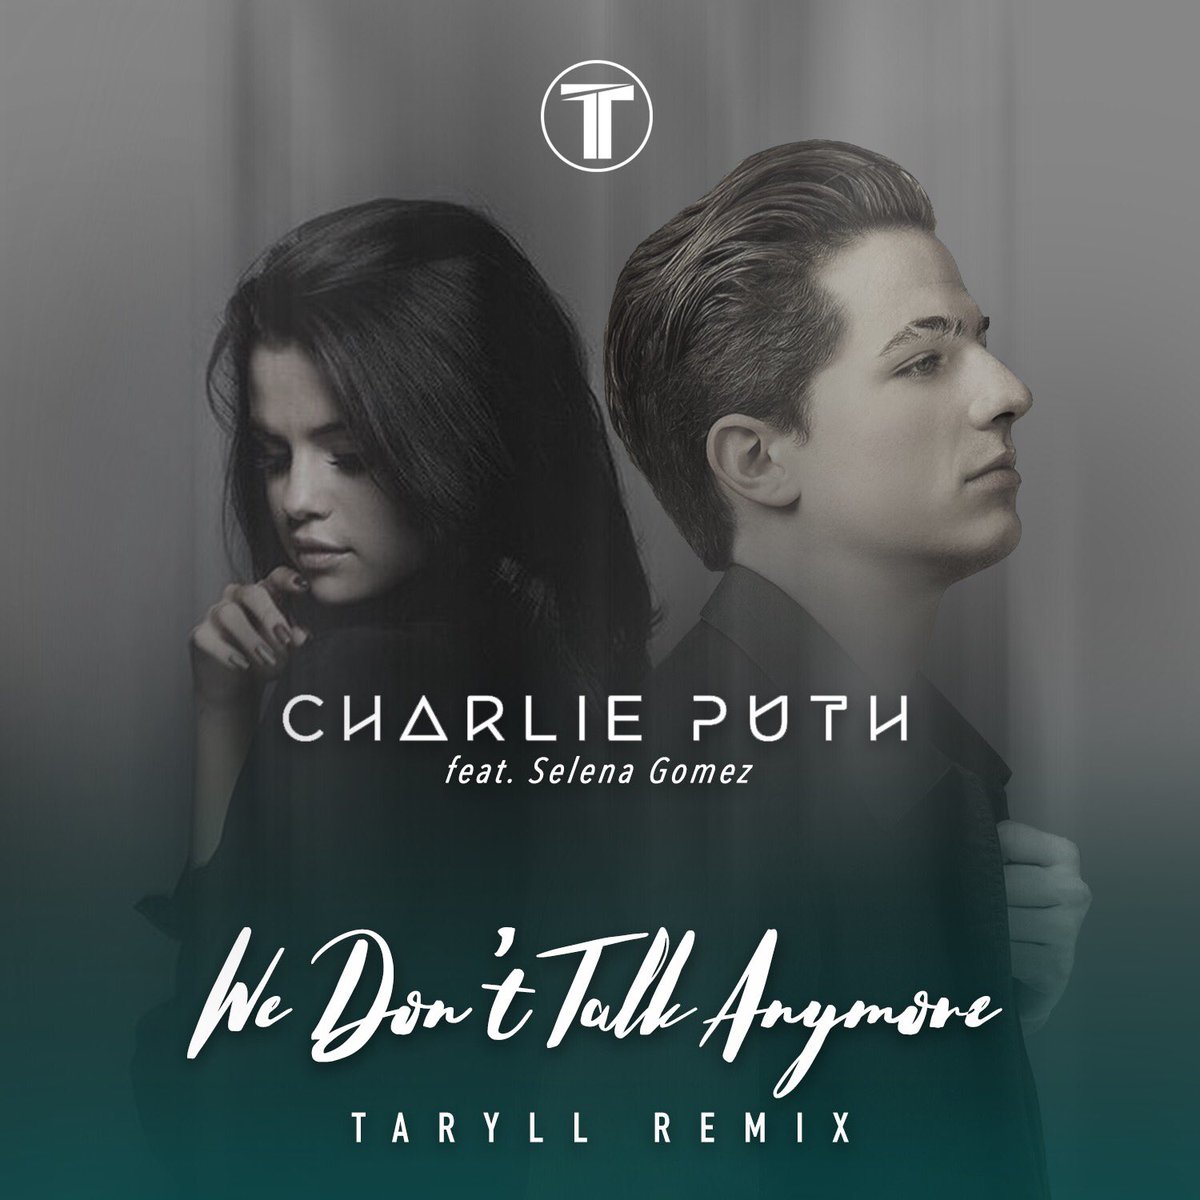 Add Charlie Puth feat. Selena Gomez - #WeDon'tTalkAnymore #TARYLLremix to your playlist with a free download available now.